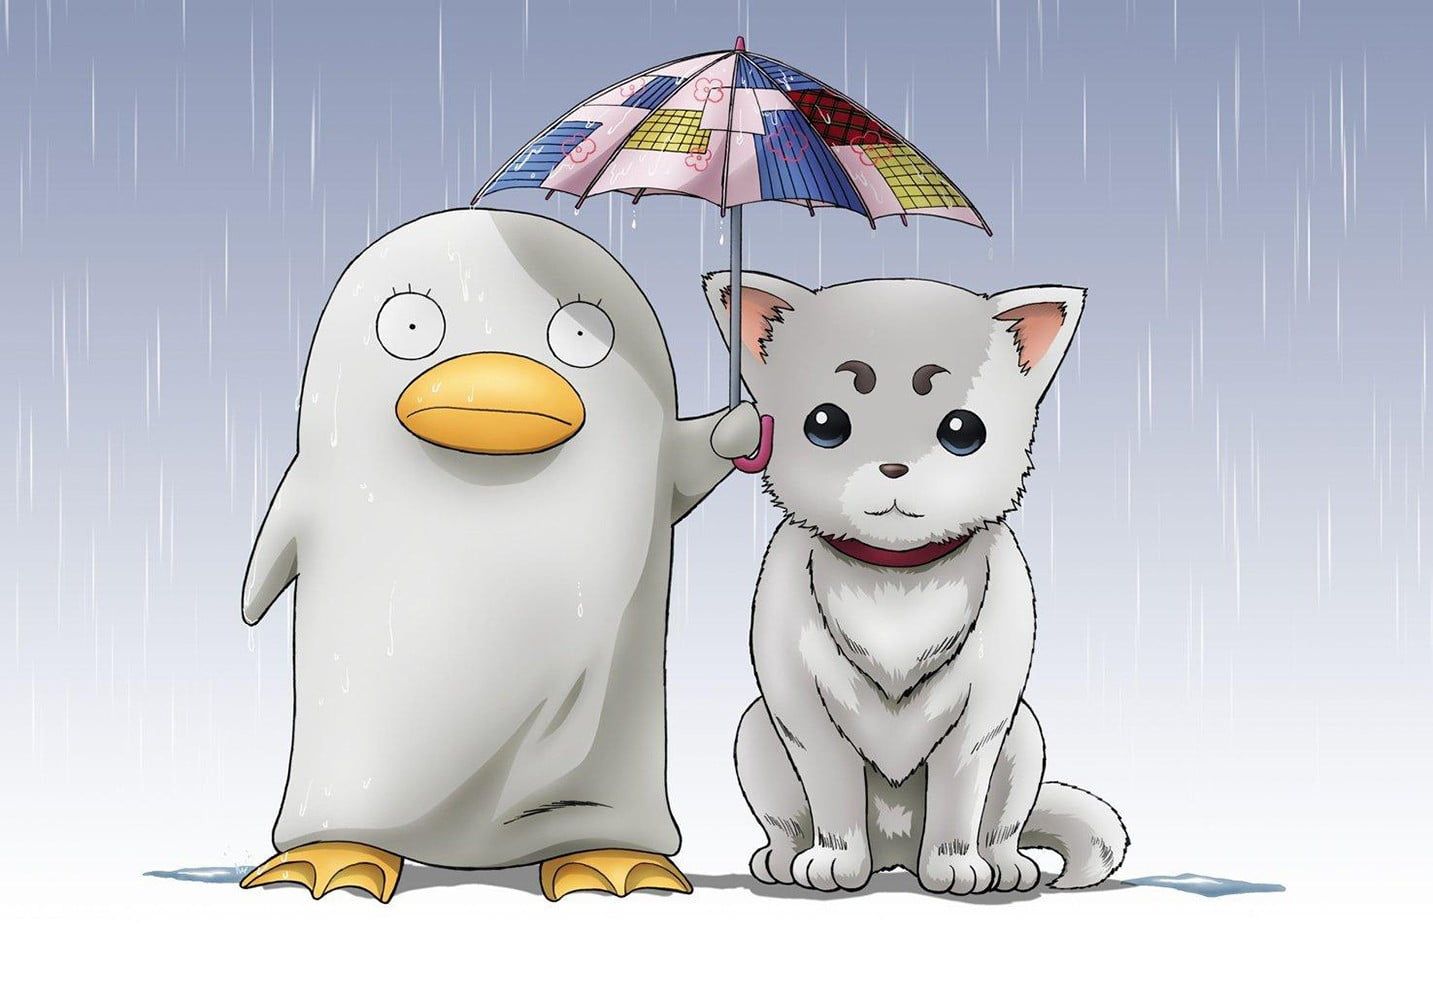 Animal Wallpaper • Gintama pet dog and duck digital wallpaper, anime, simple background • Wallpaper For You The Best Wallpaper For Desktop & Mobile